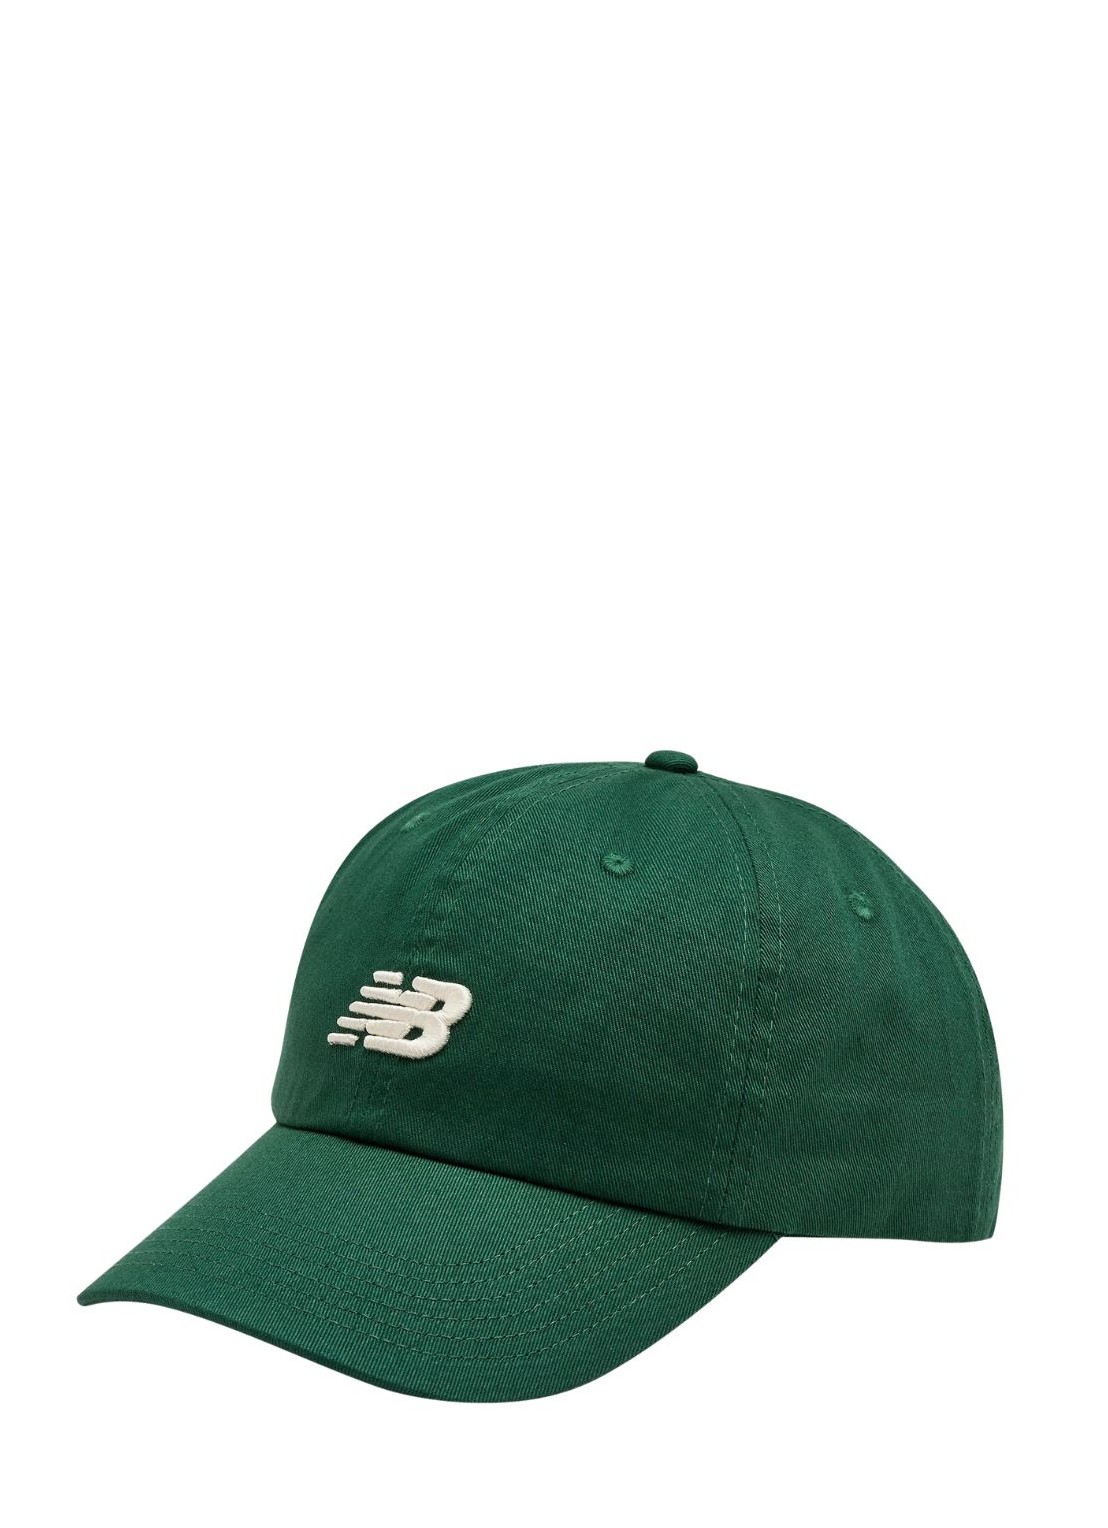 Gorras new balance cap woman6 panel classic hat - lah91014nwg nwg talla verde
 